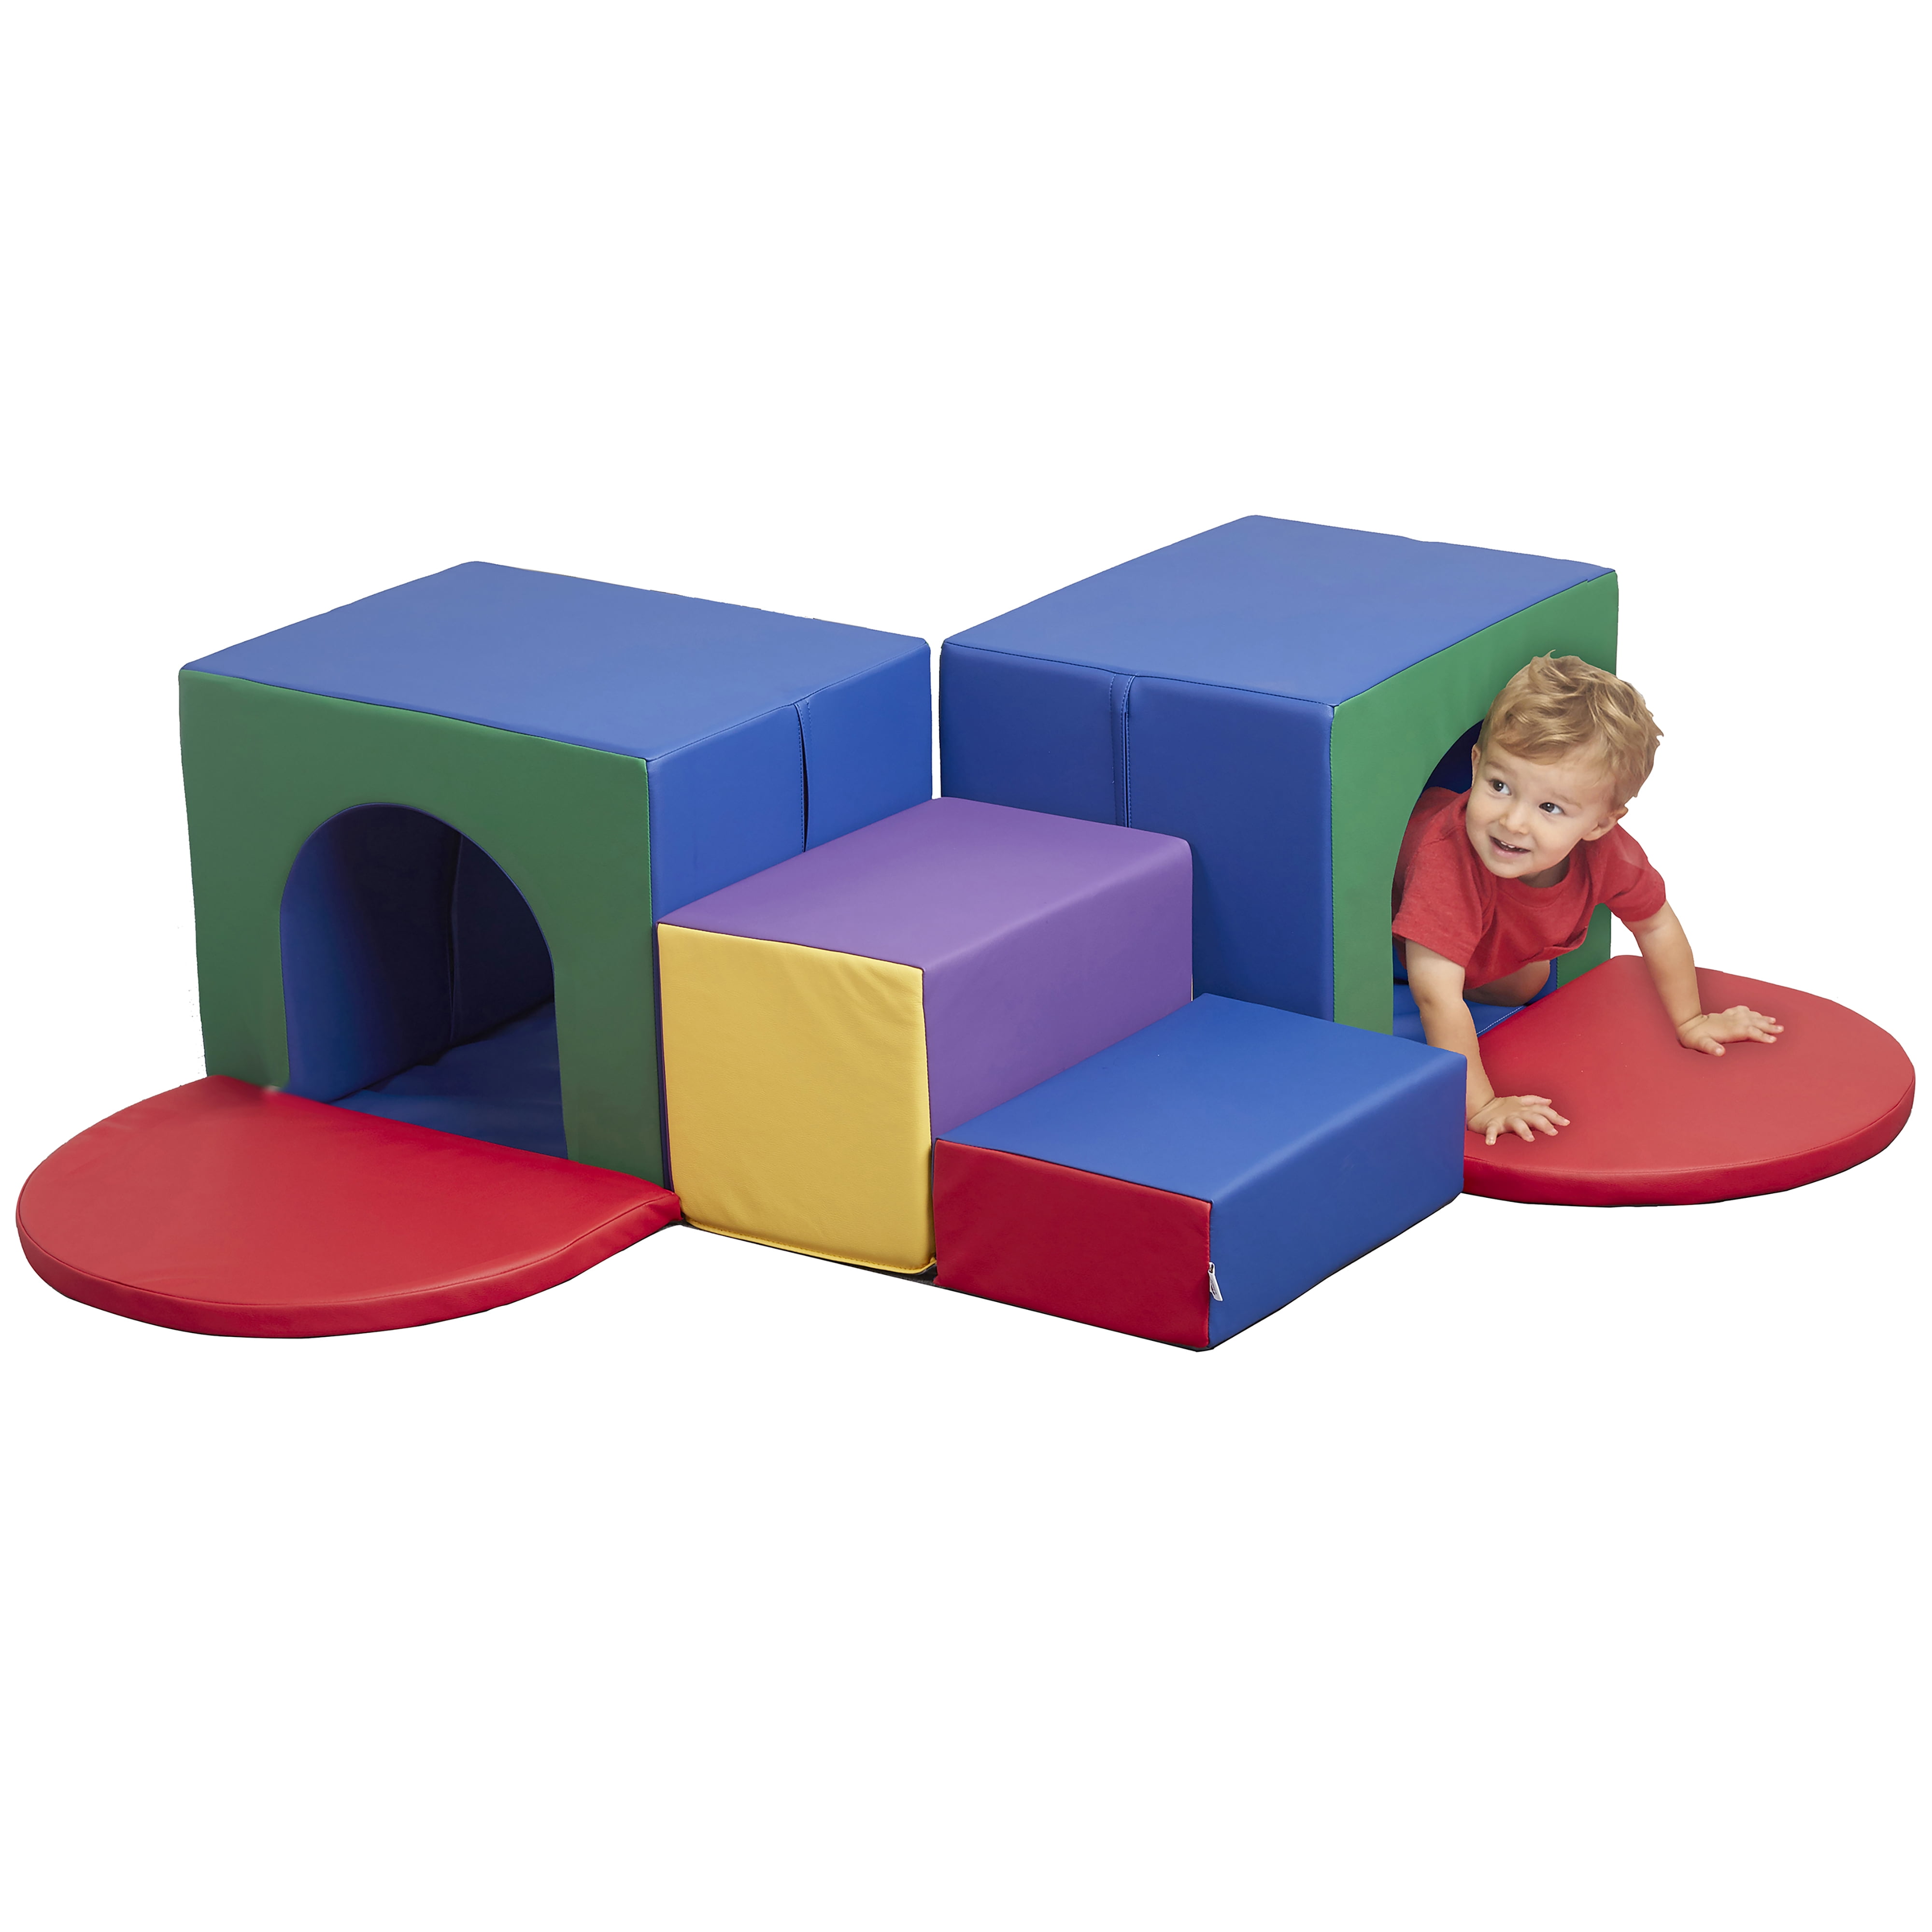 Childrens Factory Tunnel Labyrinth Toddler Climbing Toys Climber for Kids Indoor Playground